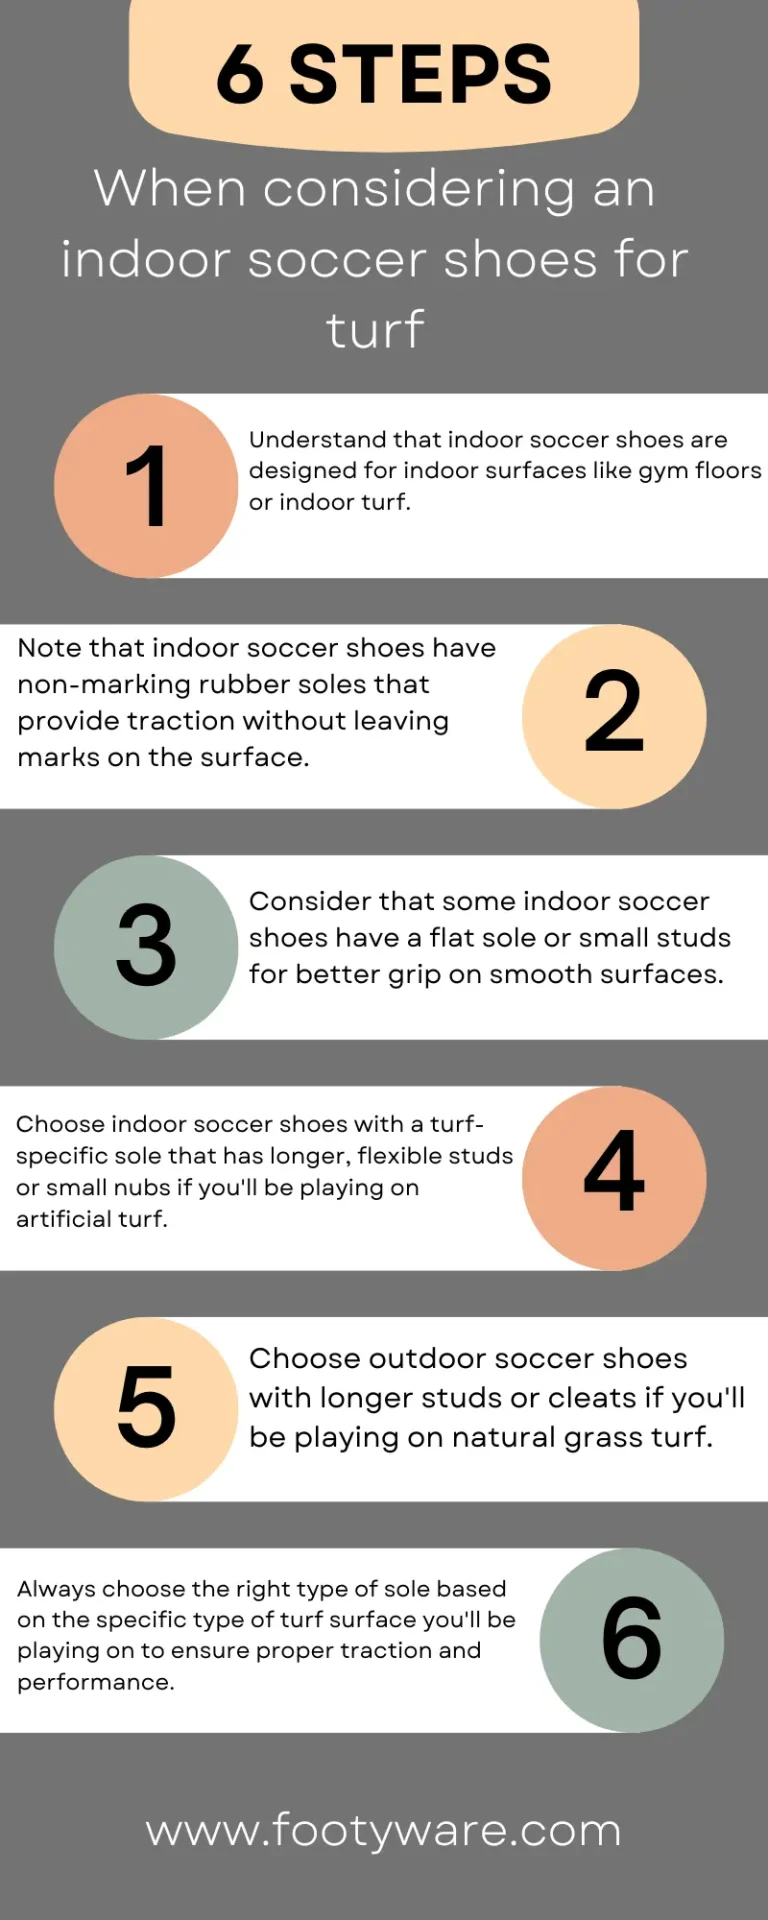 When considering an indoor soccer shoes for turf